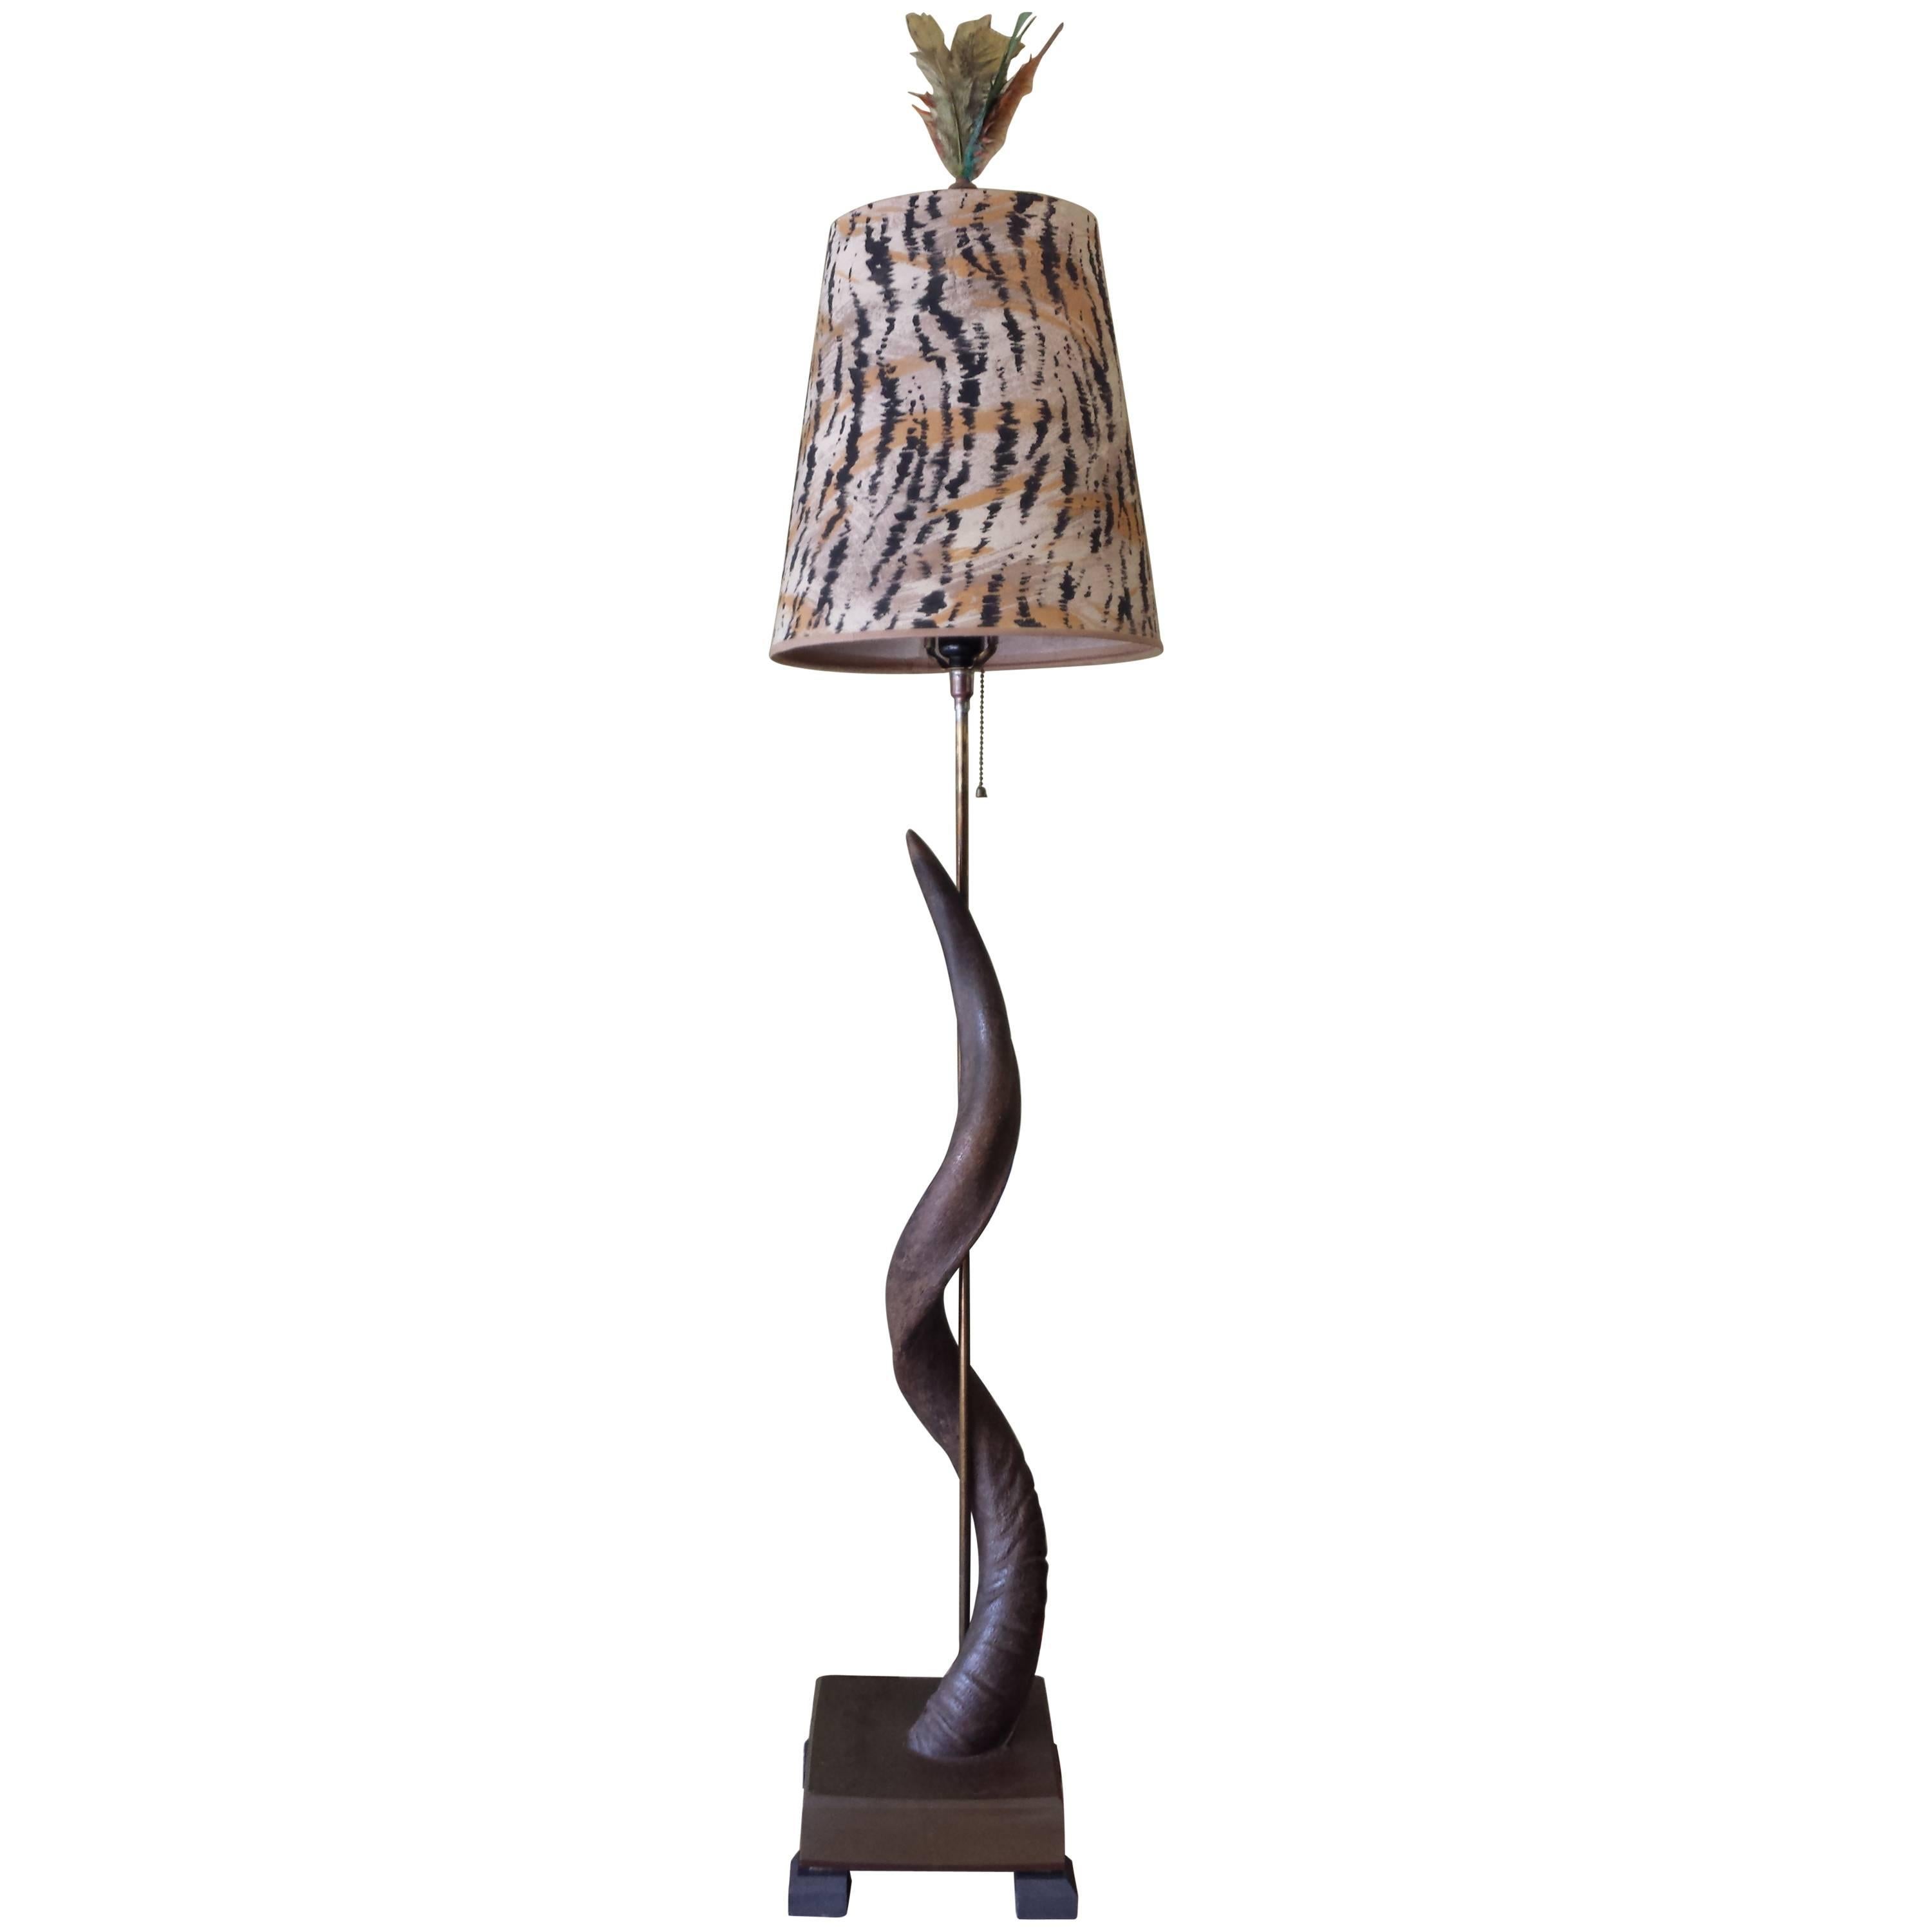 African Greater Kudu Horn Floor Lamp, Custom Lampshade & Colored Feather Finial